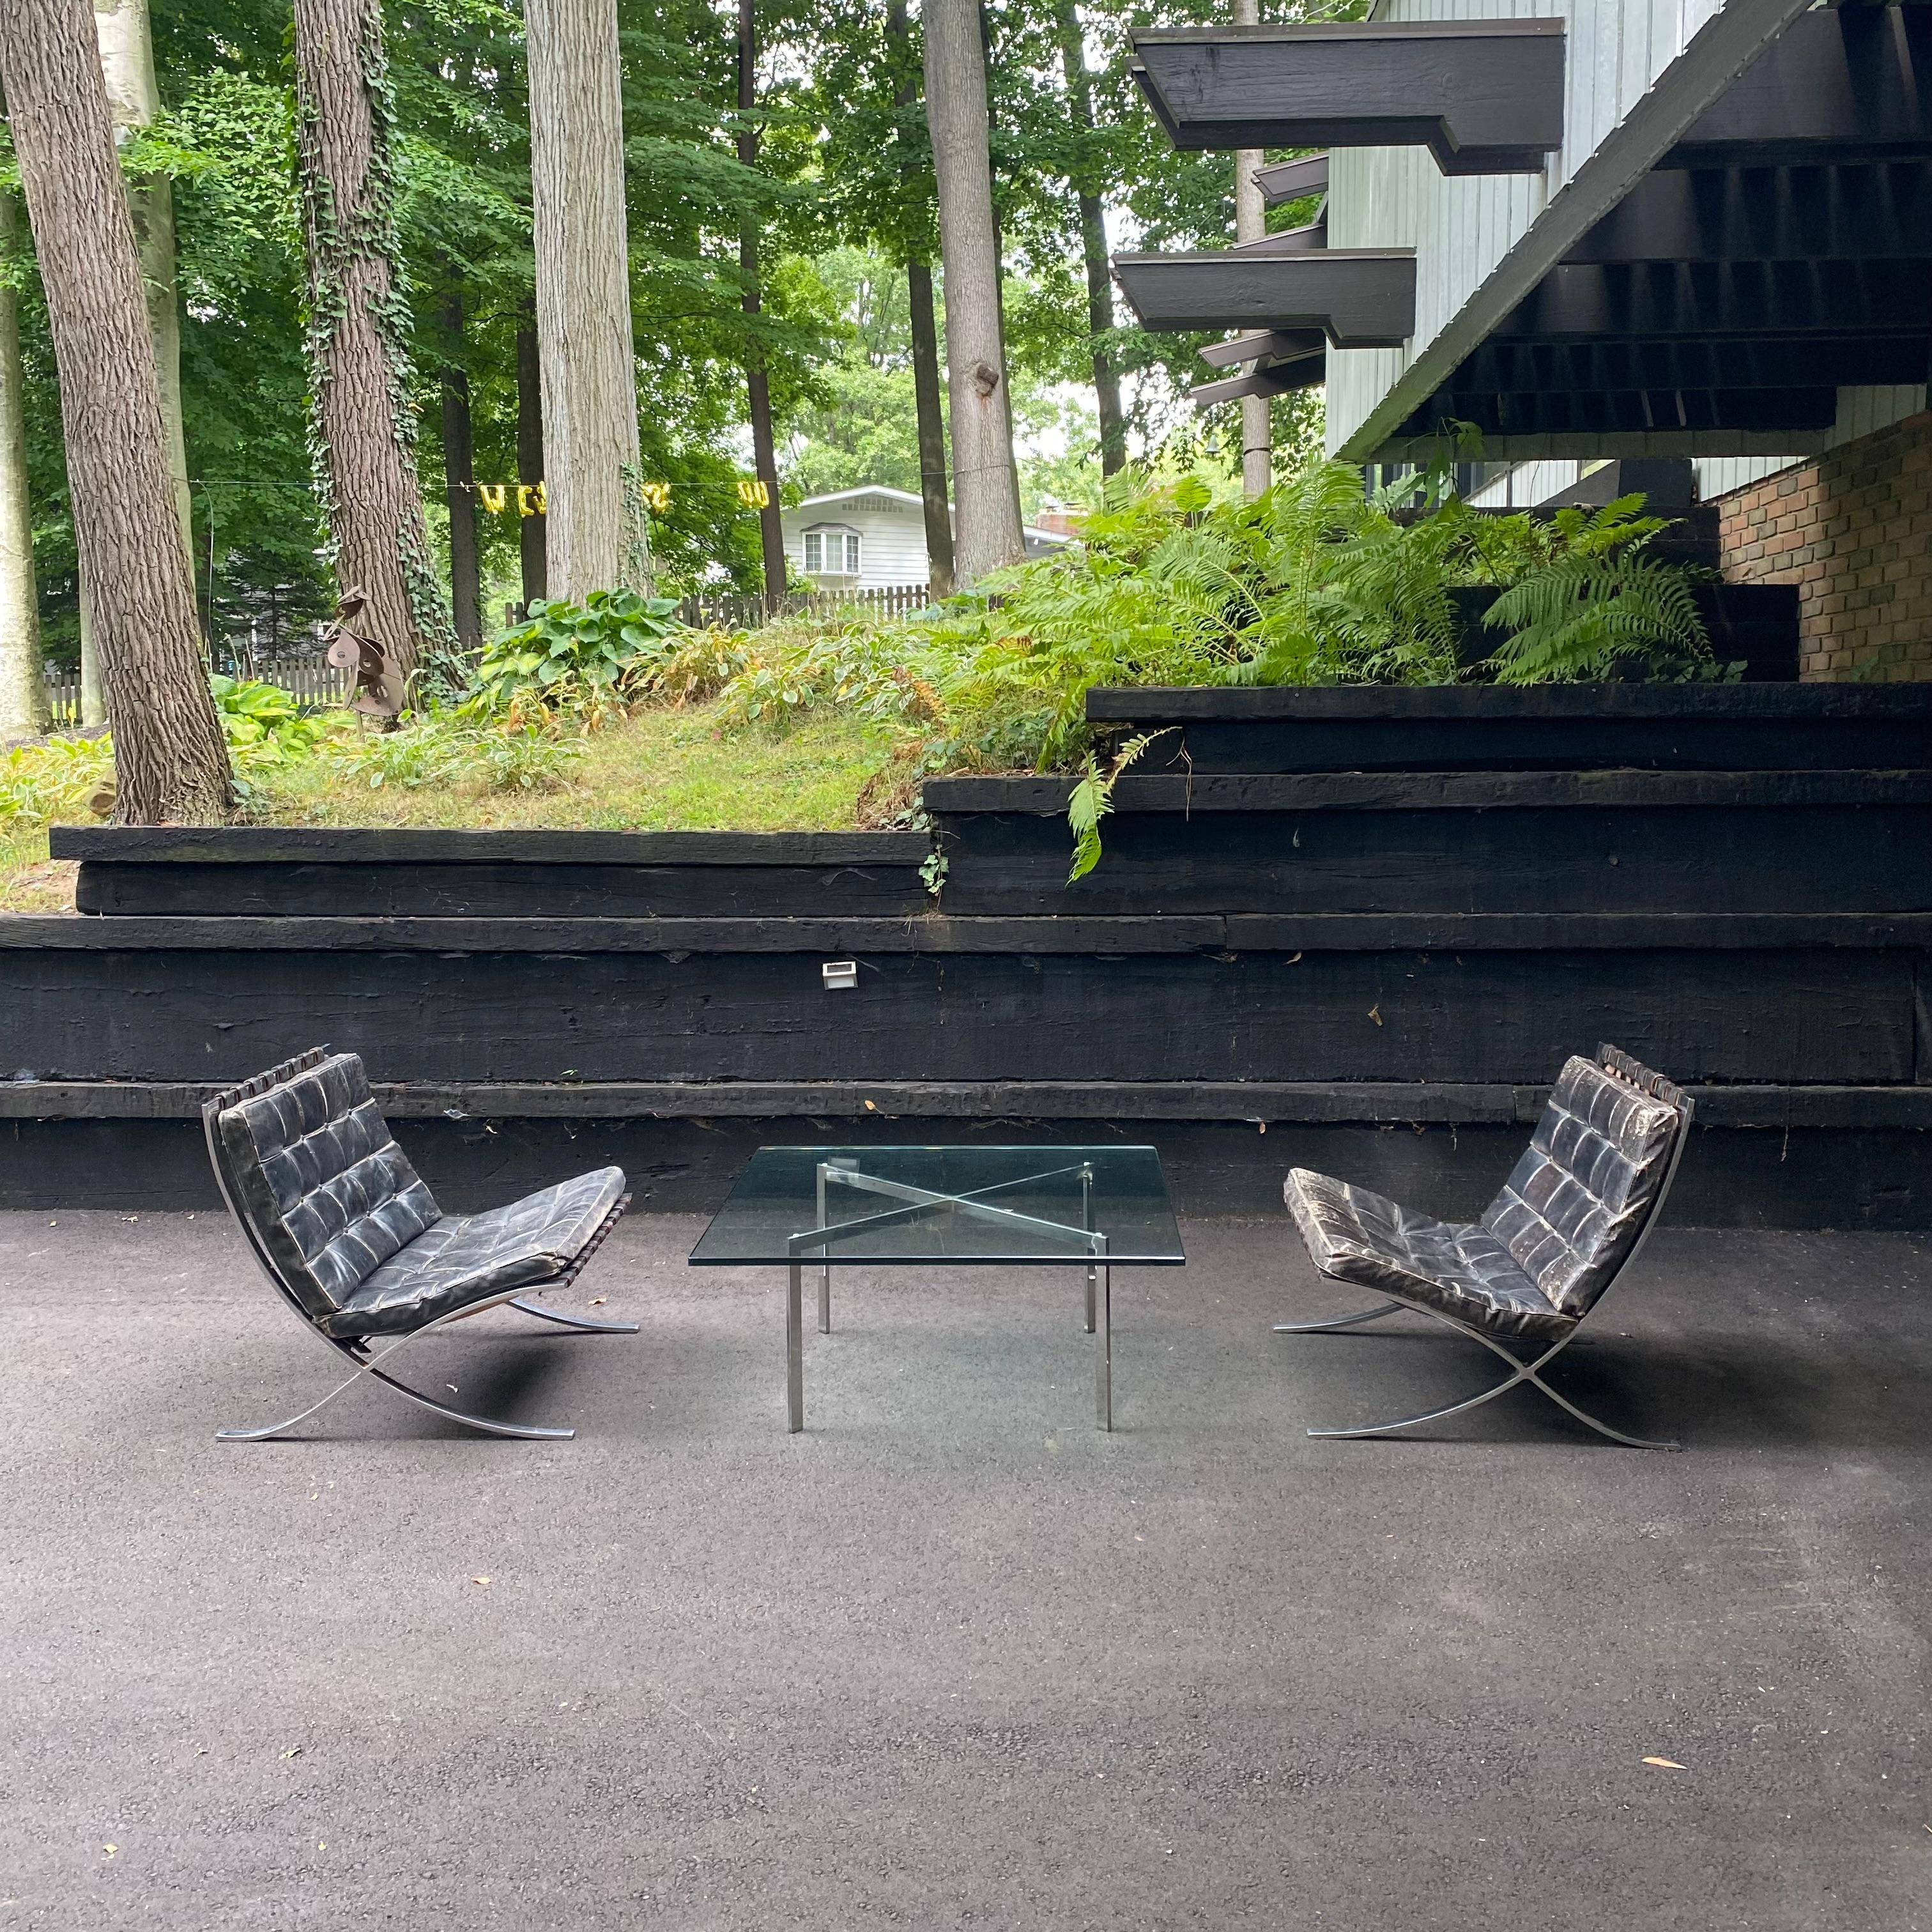 1950’s Authentic Knoll Barcelona pair of chairs and coffee table by Mies van der Rohe.

This is an exceptional pair of original authentic Barcelona chairs with matching coffee table designed by Ludwig Mies van der Rohe for his Barcelona Pavilion in